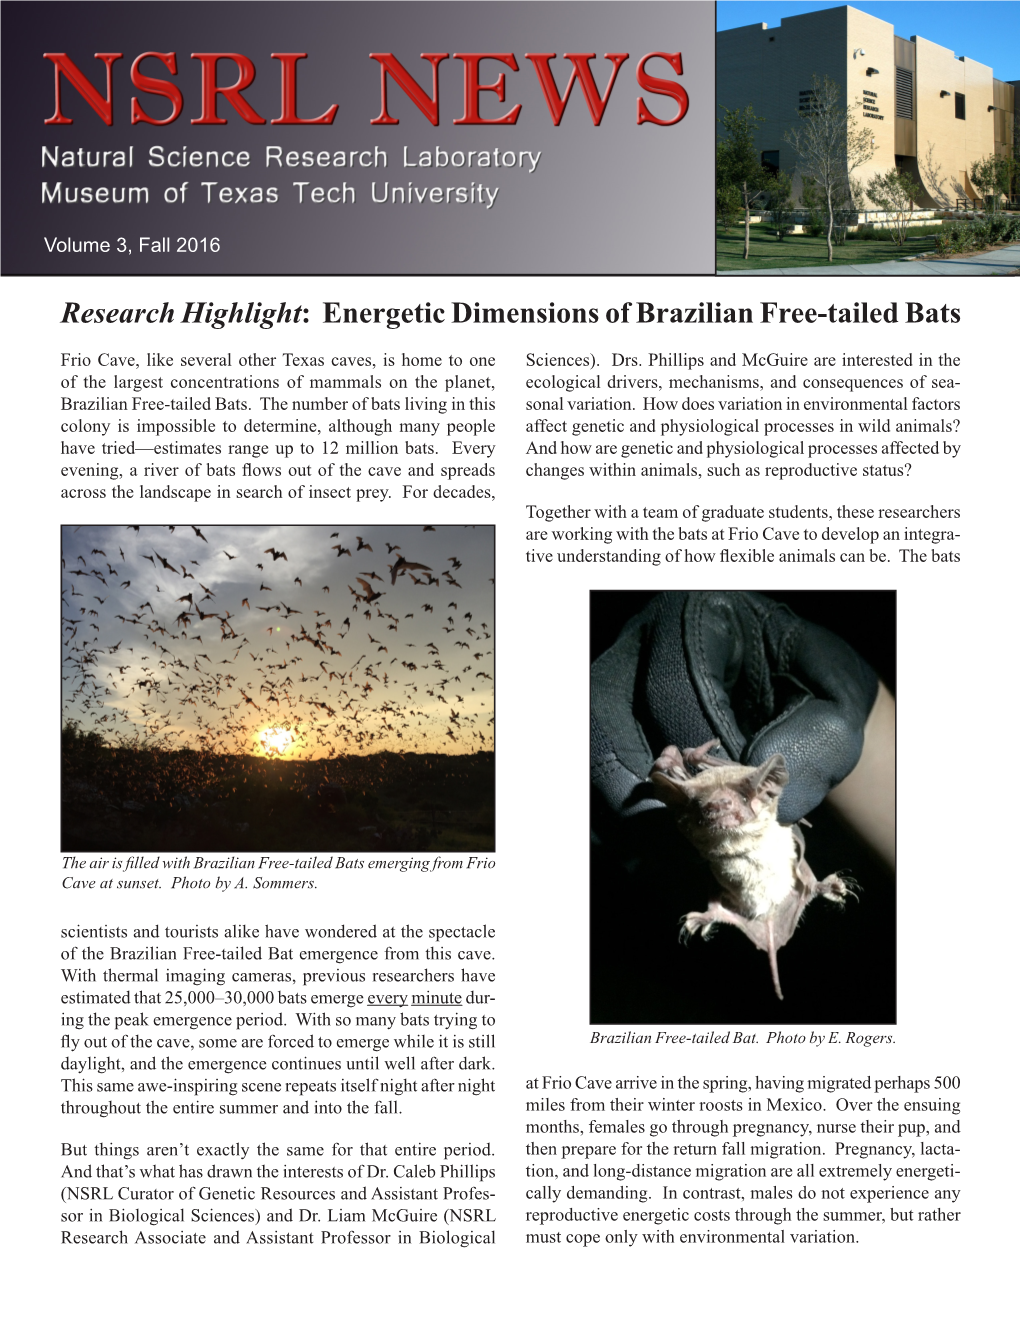 Energetic Dimensions of Brazilian Free-Tailed Bats